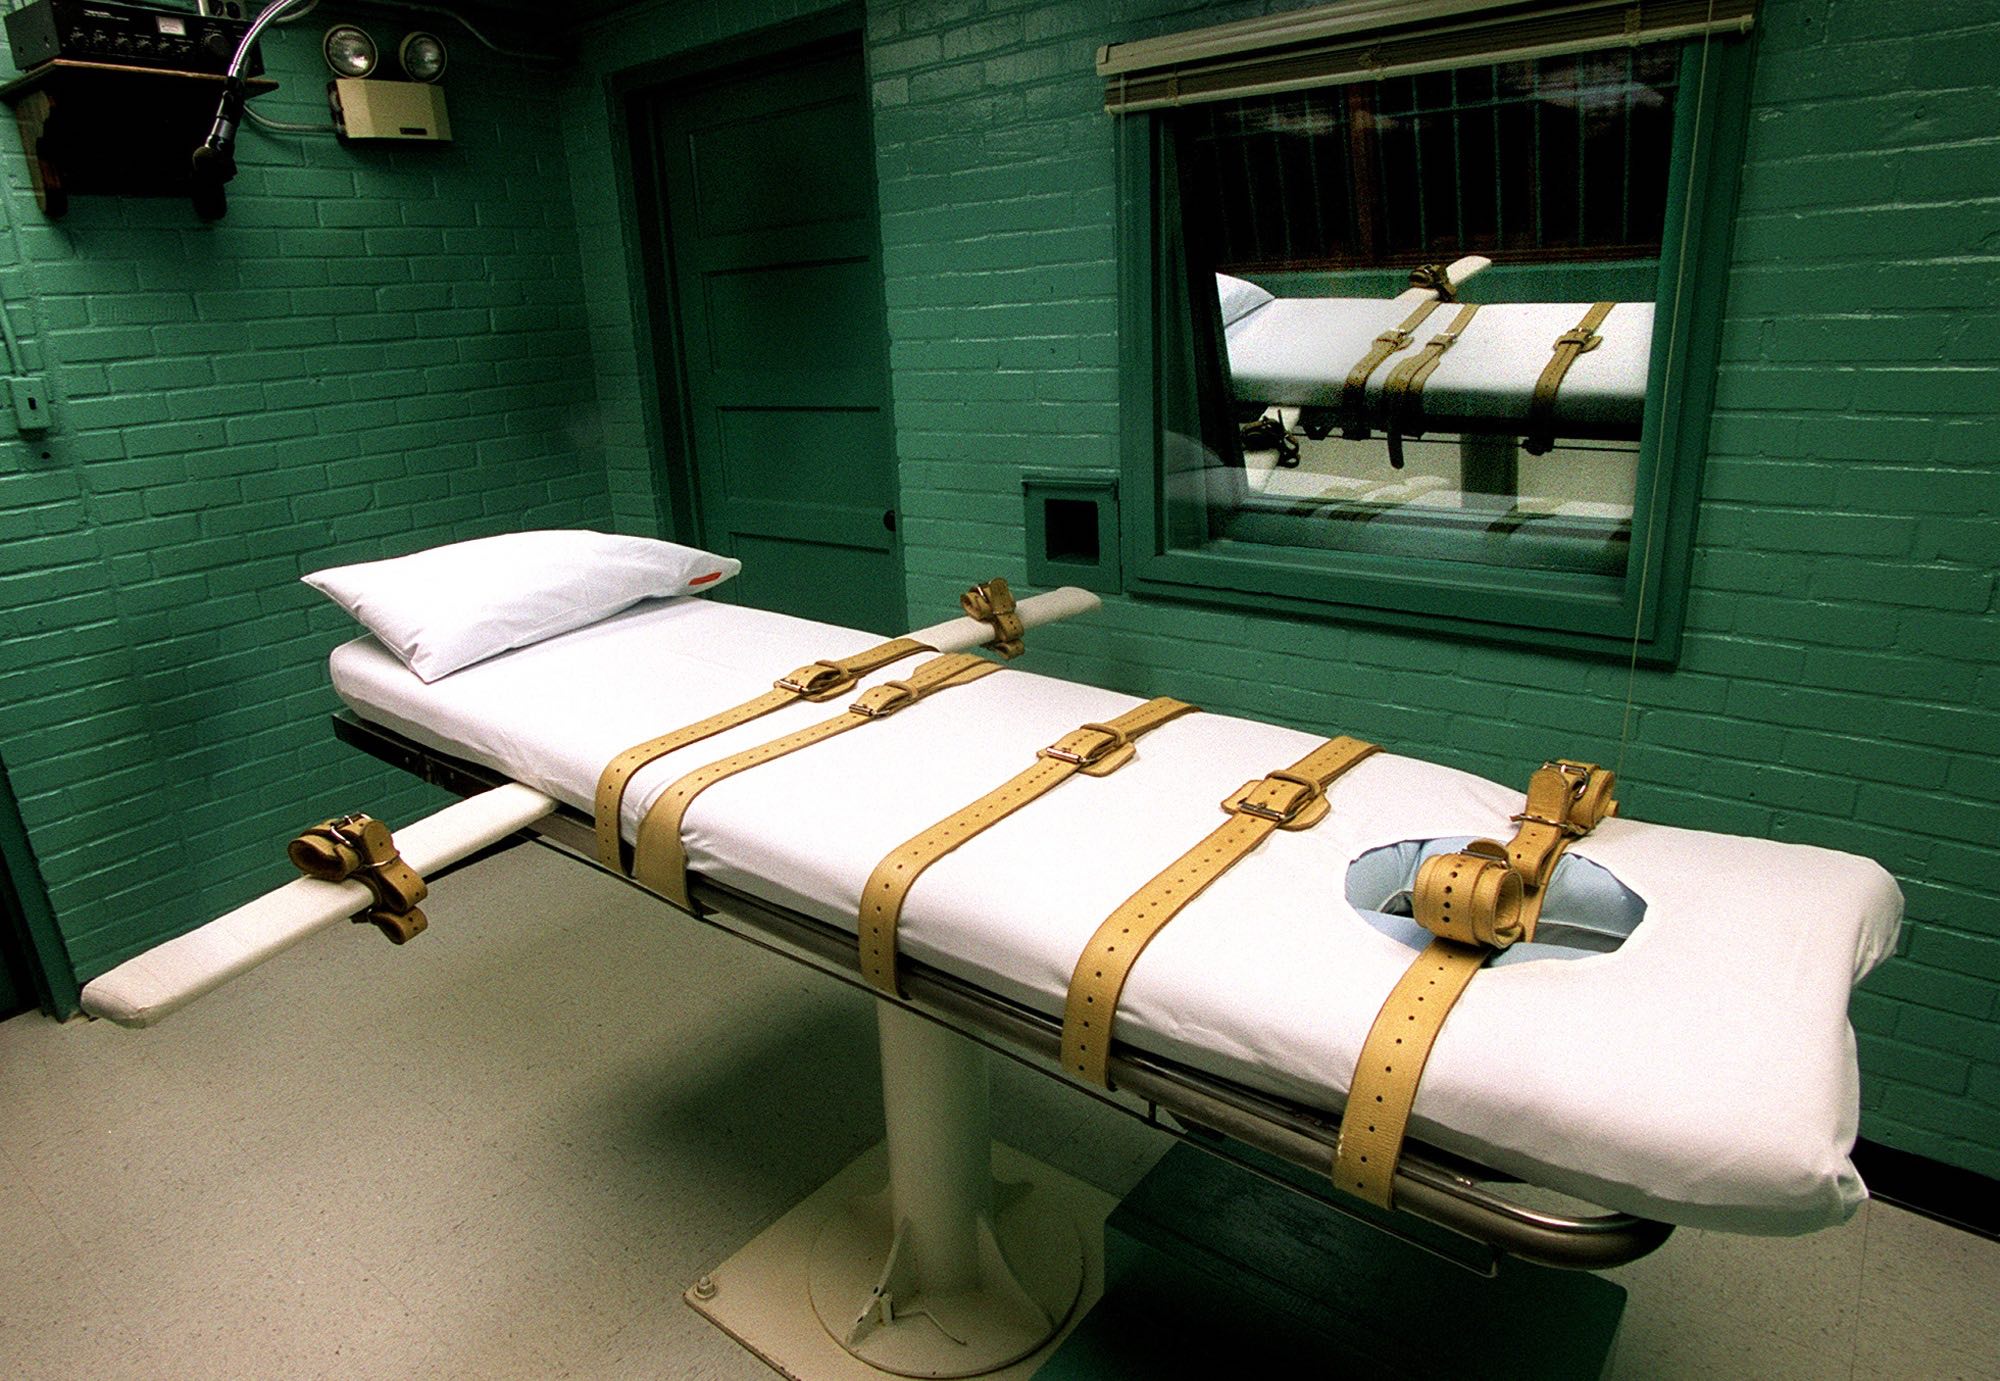 Stop Executions in Louisiana